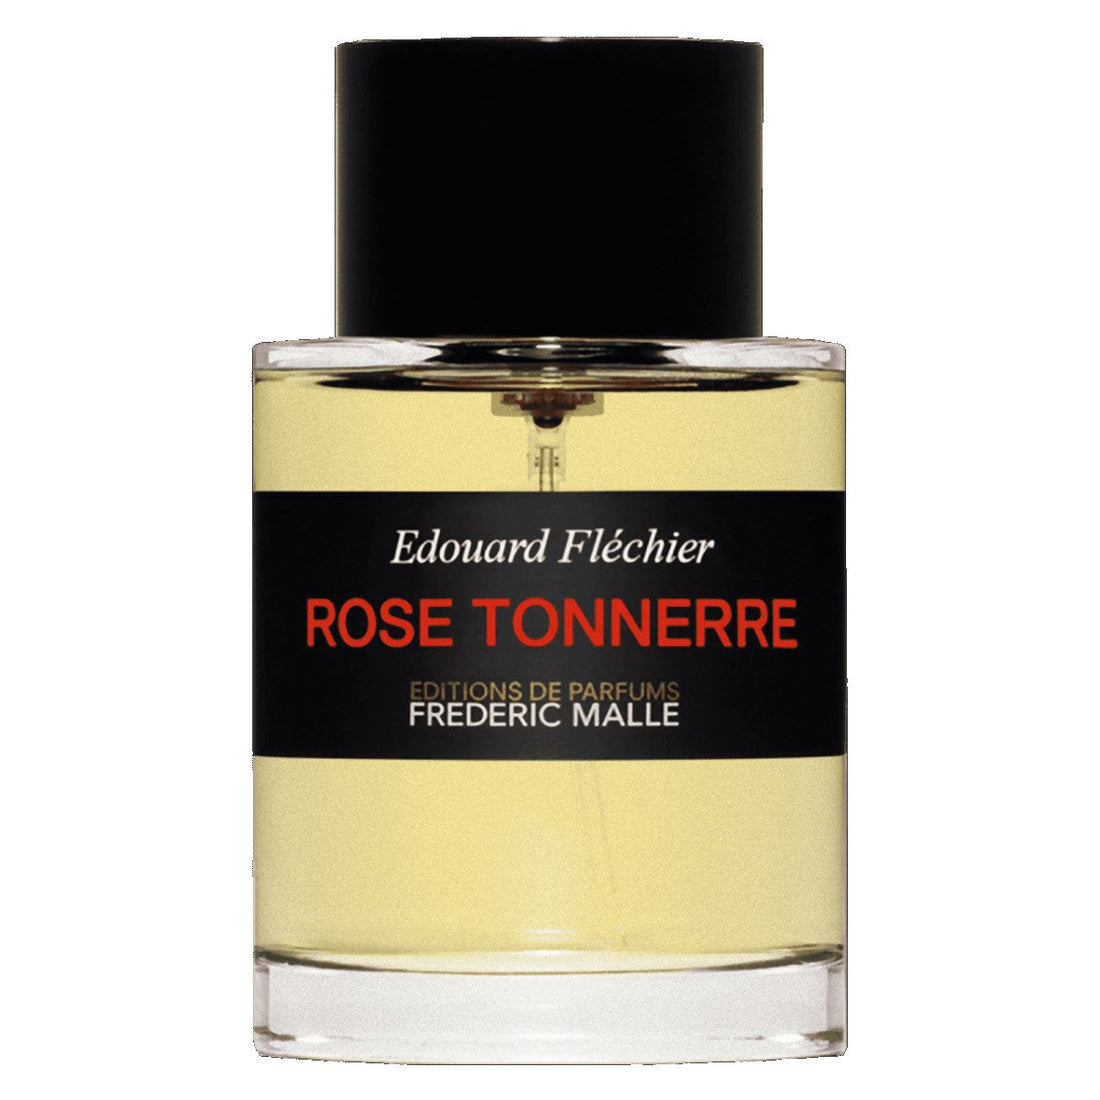 Rose Tonnerre Frederic Malle - 100 ml